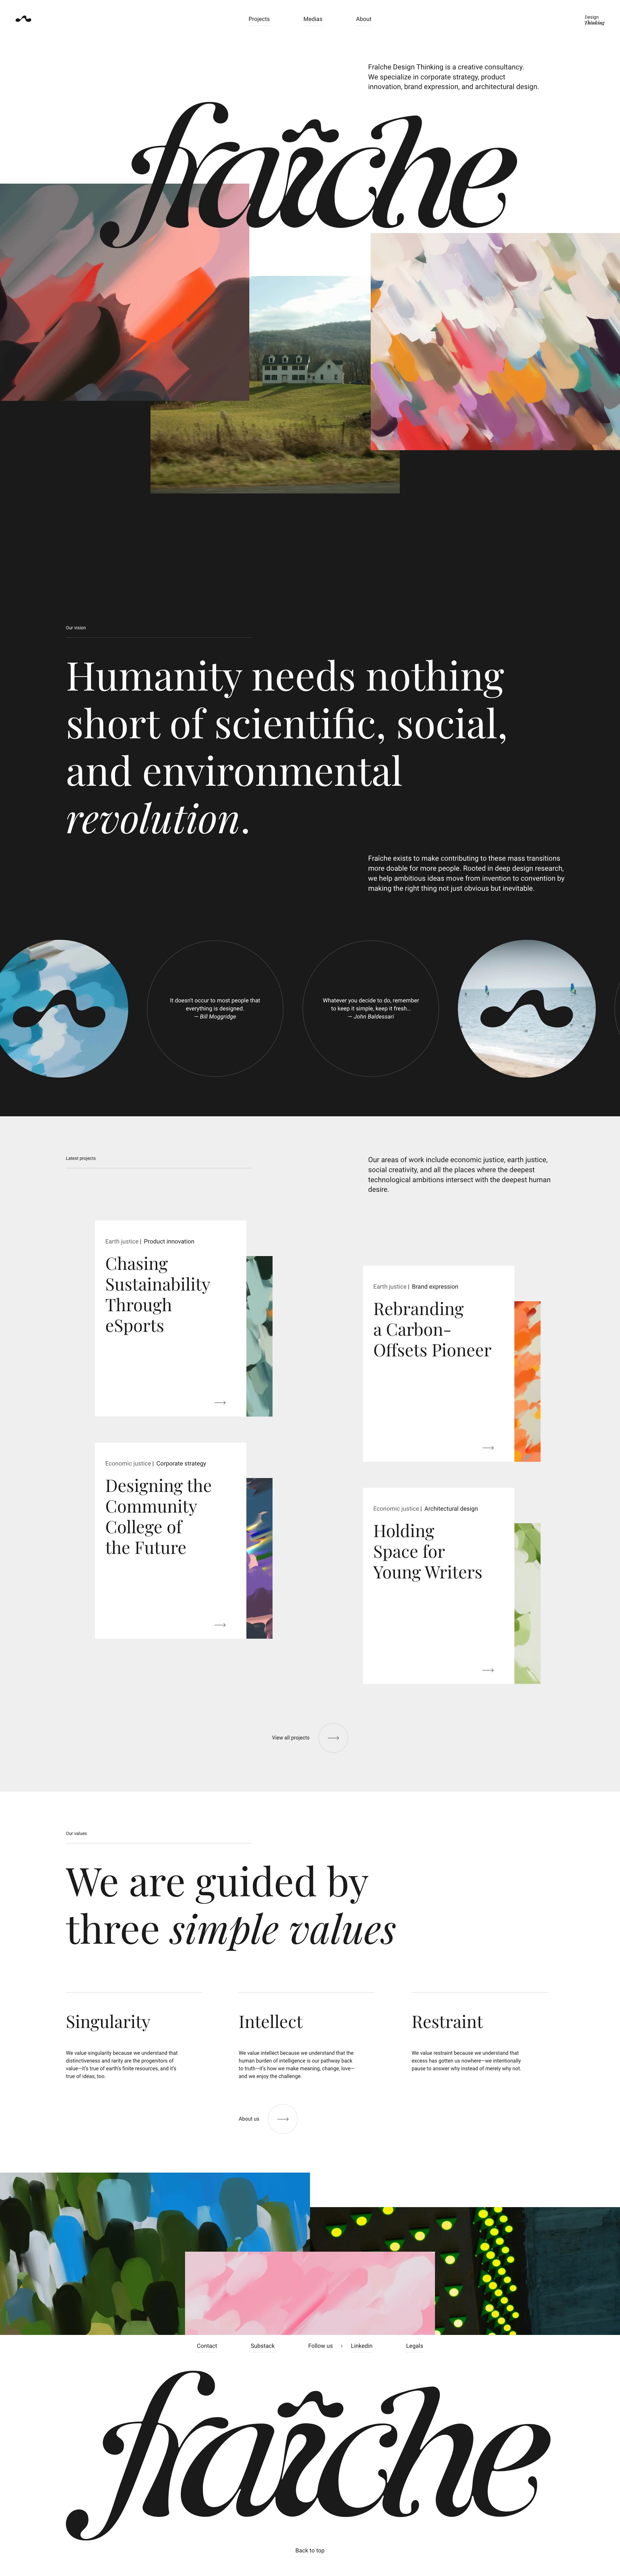 Fraîche Design Thinking Landing Page Example: Fraîche Design Thinking is a creative consultancy rooted in research, corporate strategy, product innovation, brand expression, and architectural design.